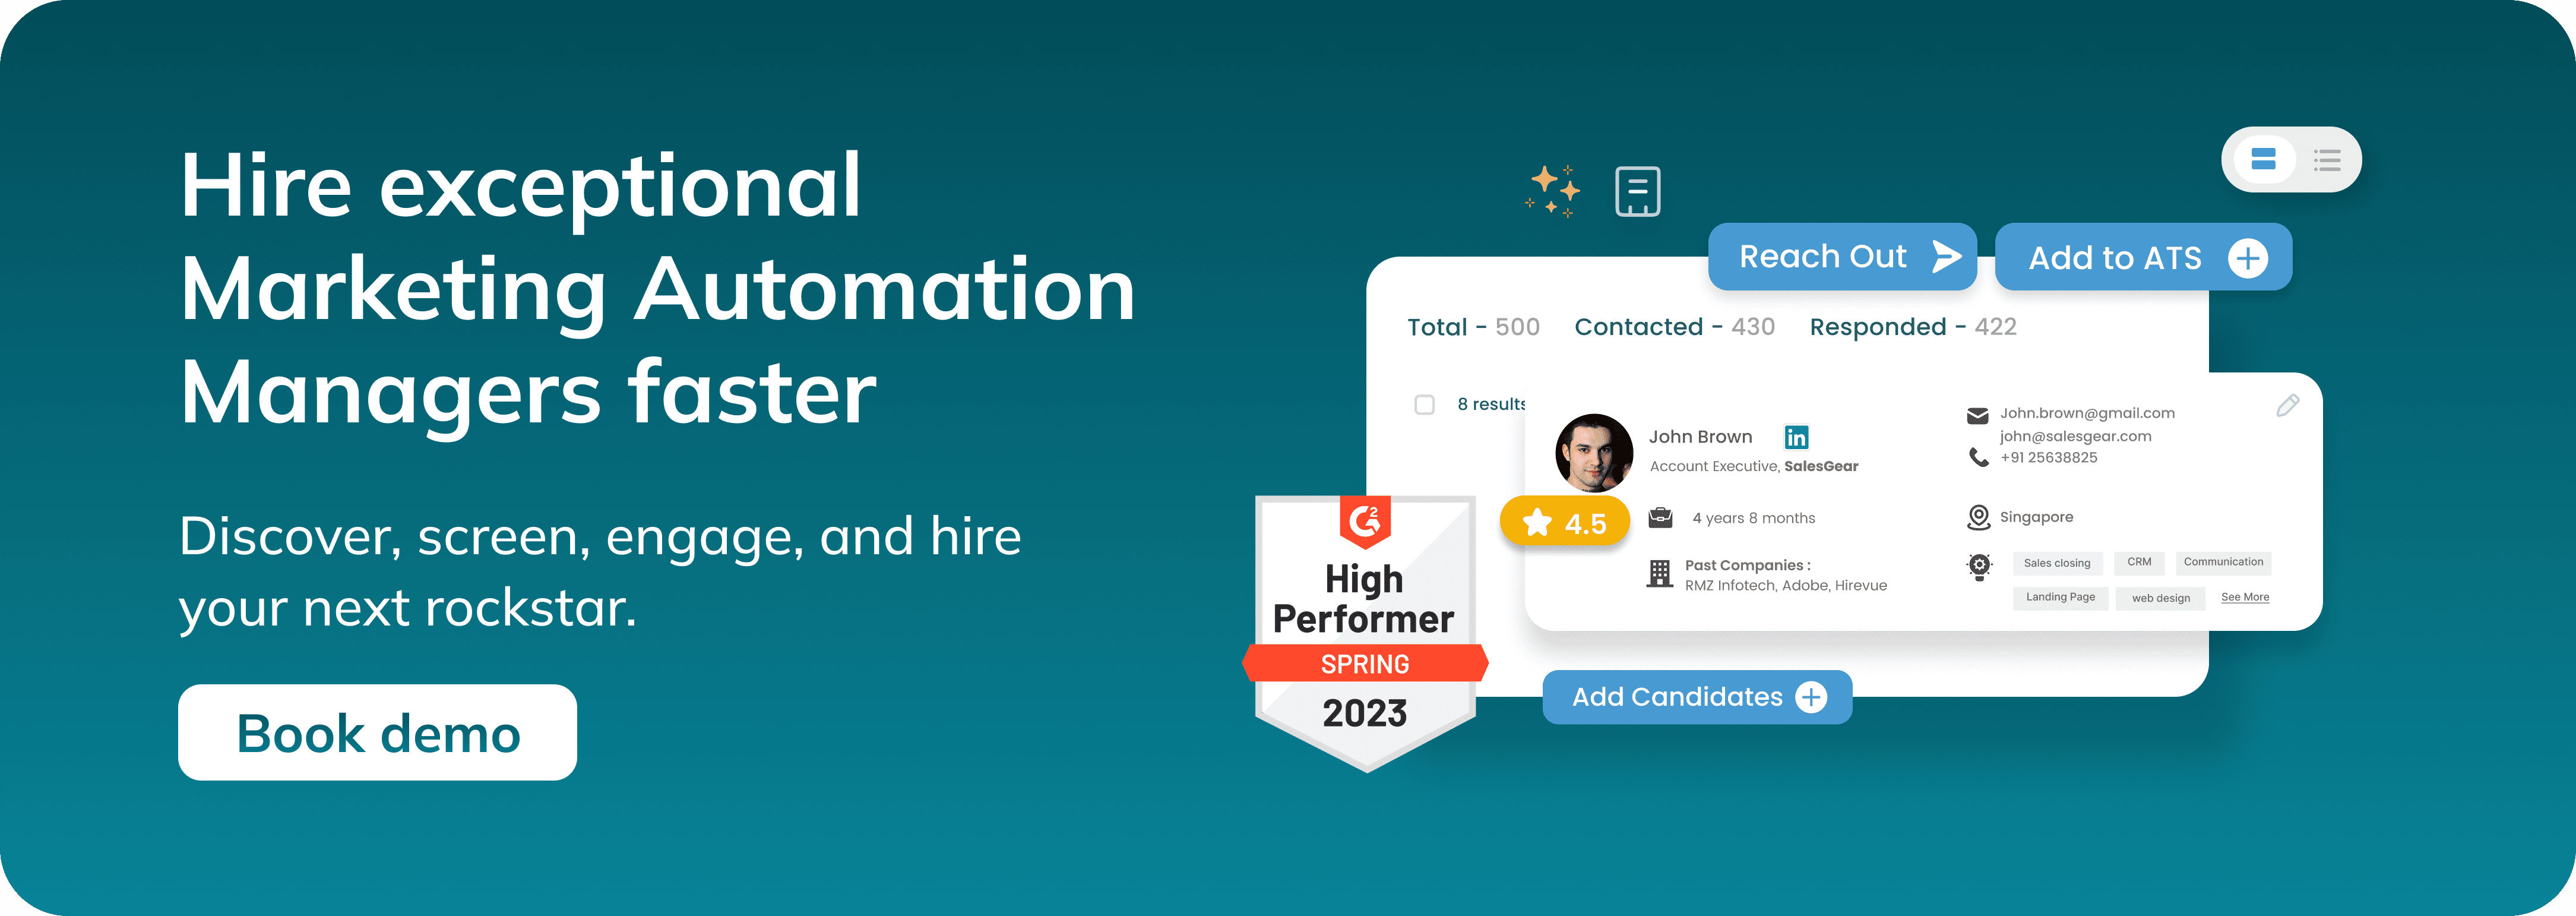 How to hire the perfect marketing automation manager.png